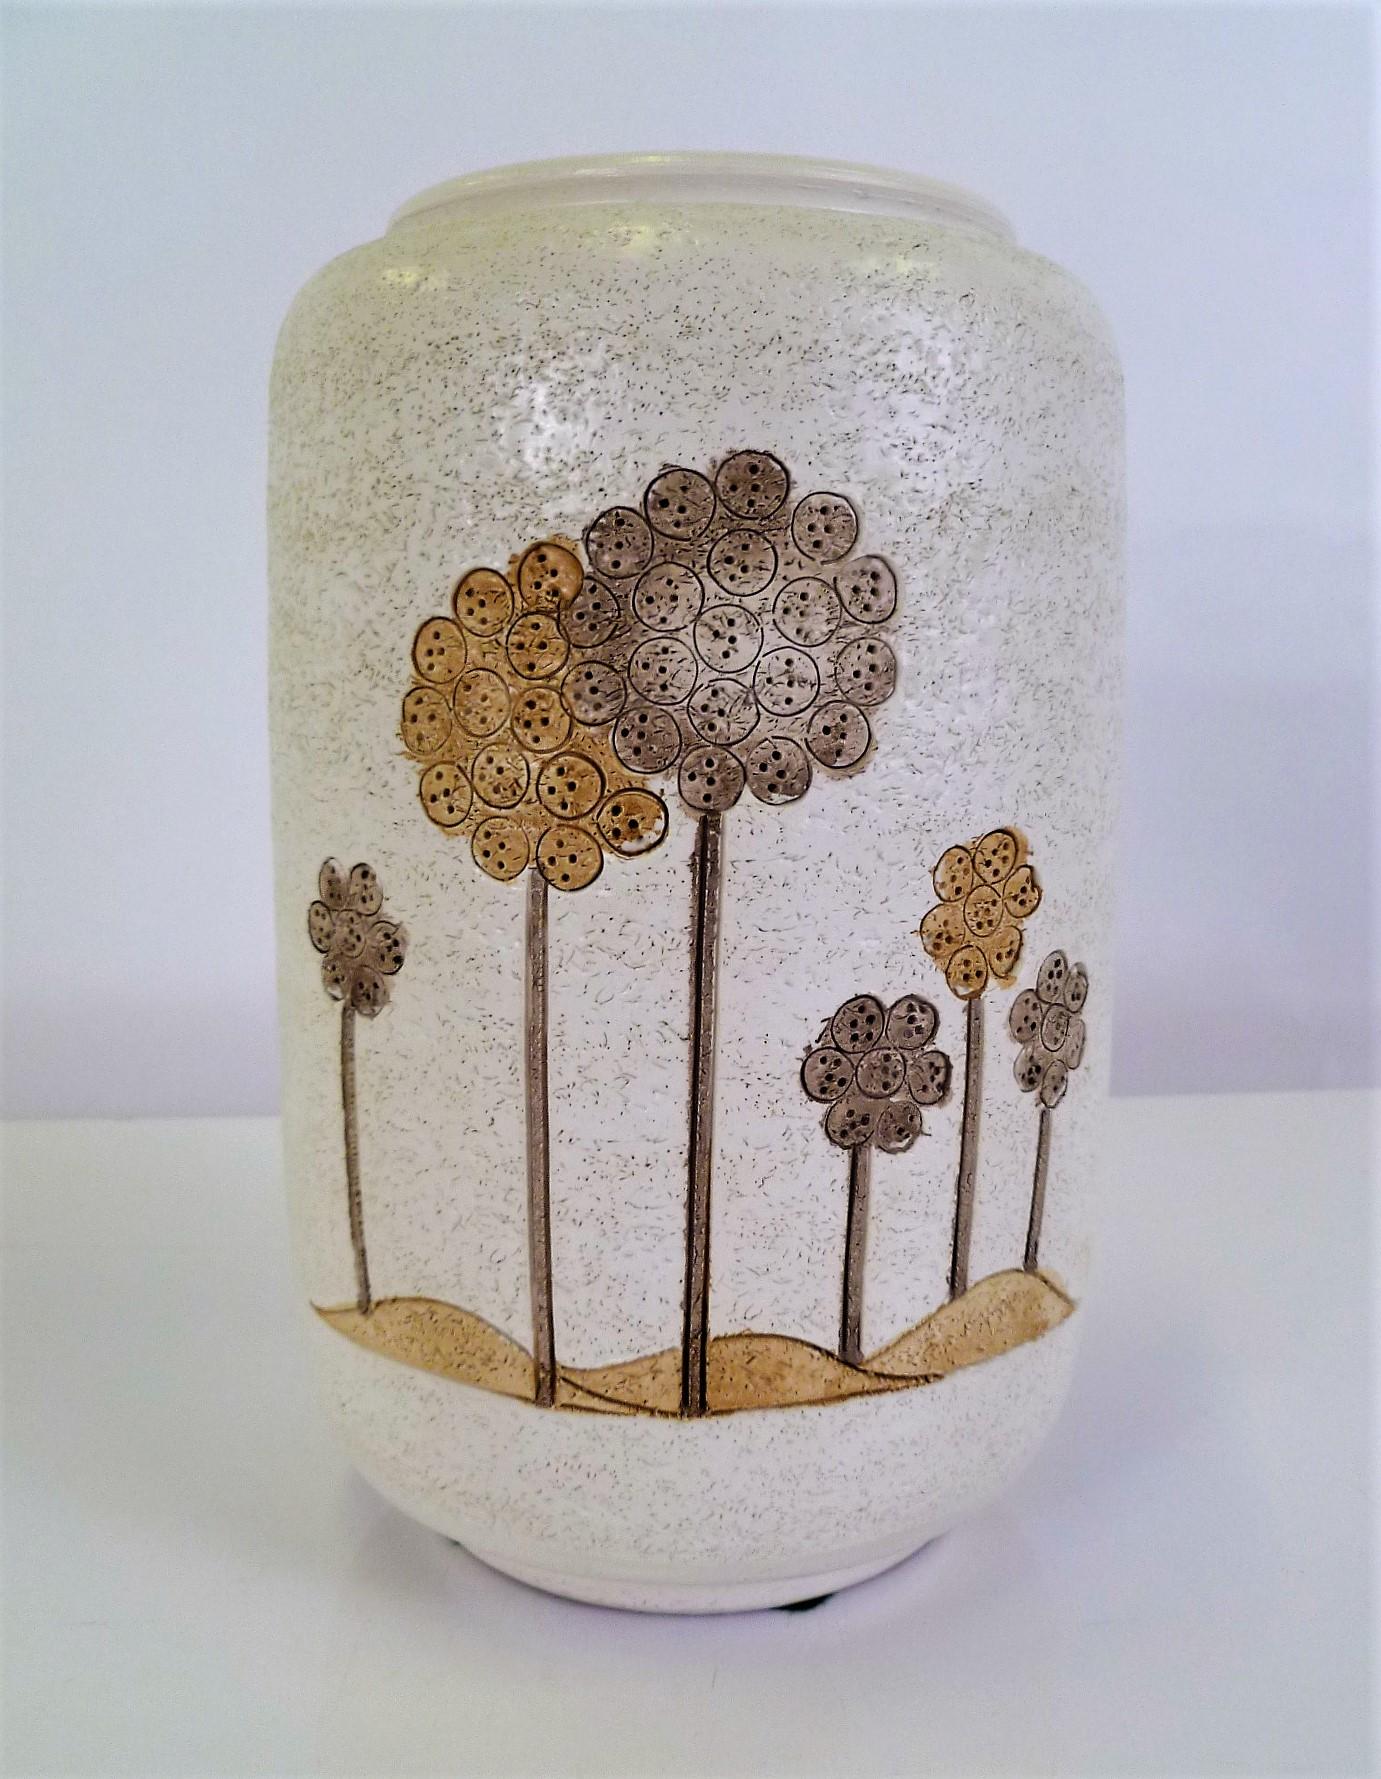 Late 1960s-early 1970s Italian modern hand thrown ceramic vase with a light textured finish. More than likely produced by Ceramiche Campione (1950-1974) for New York retailer, Ardalt. The decoration is very 1960s with stylized trees or long stem